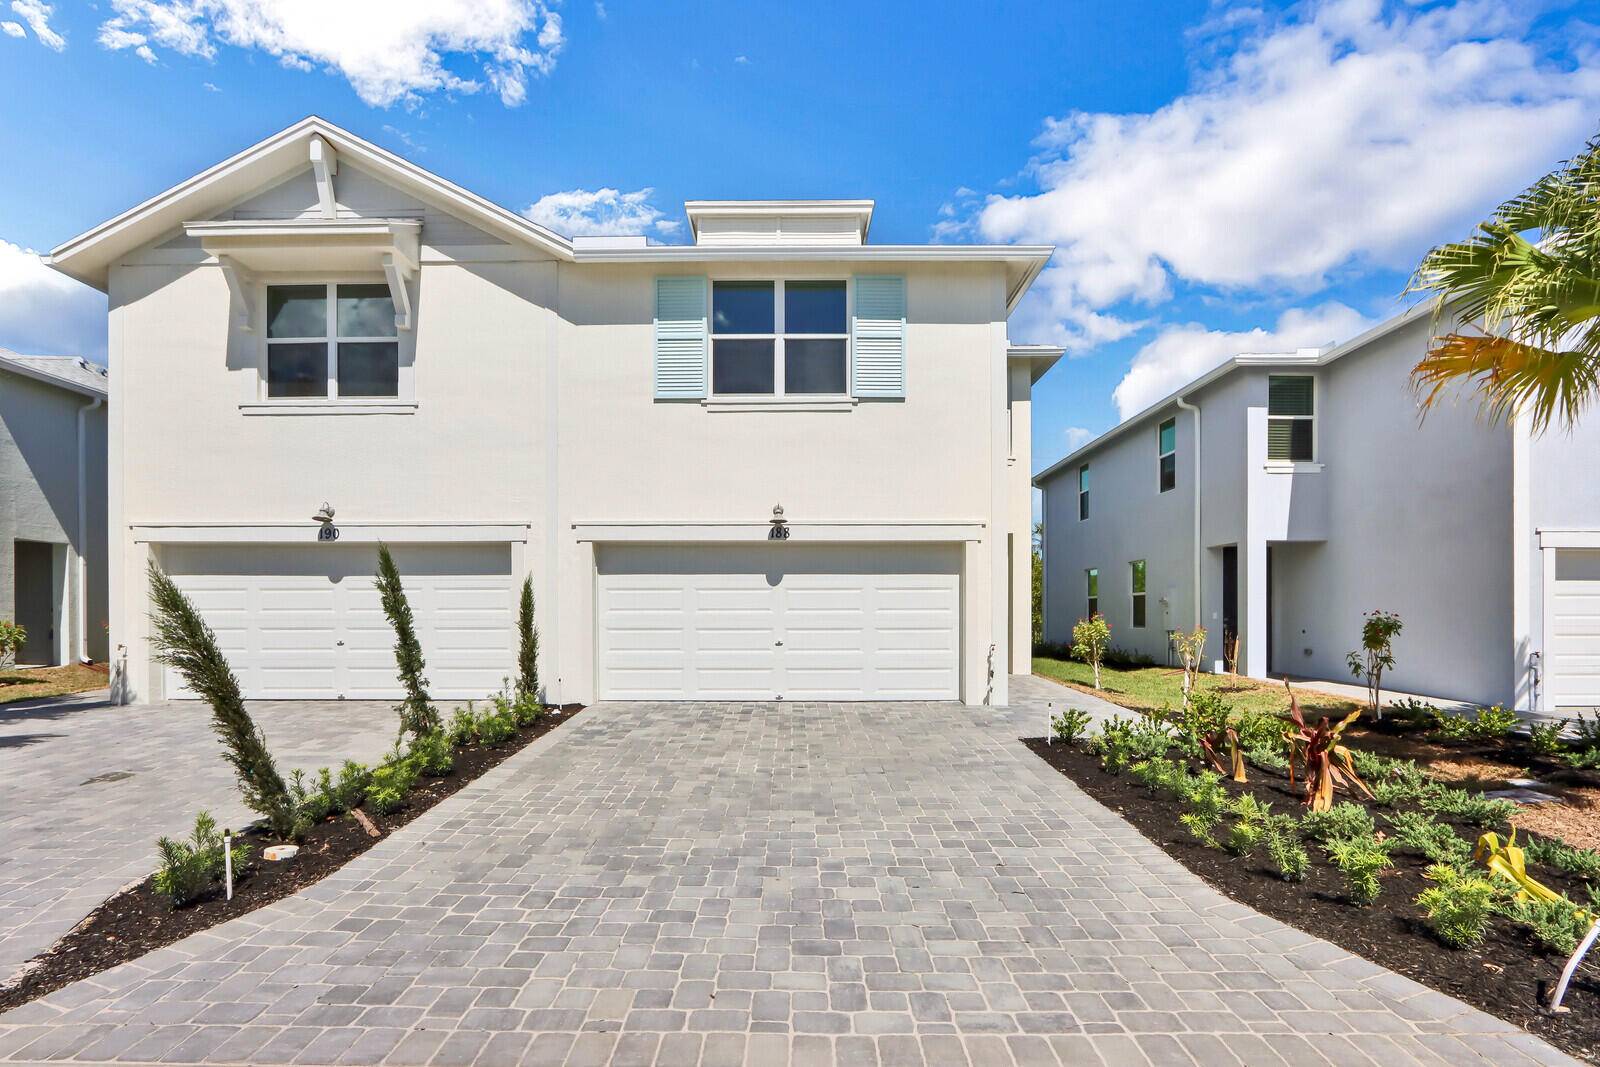 Built in 2022, this townhome is located in the heart of Jensen Beach !